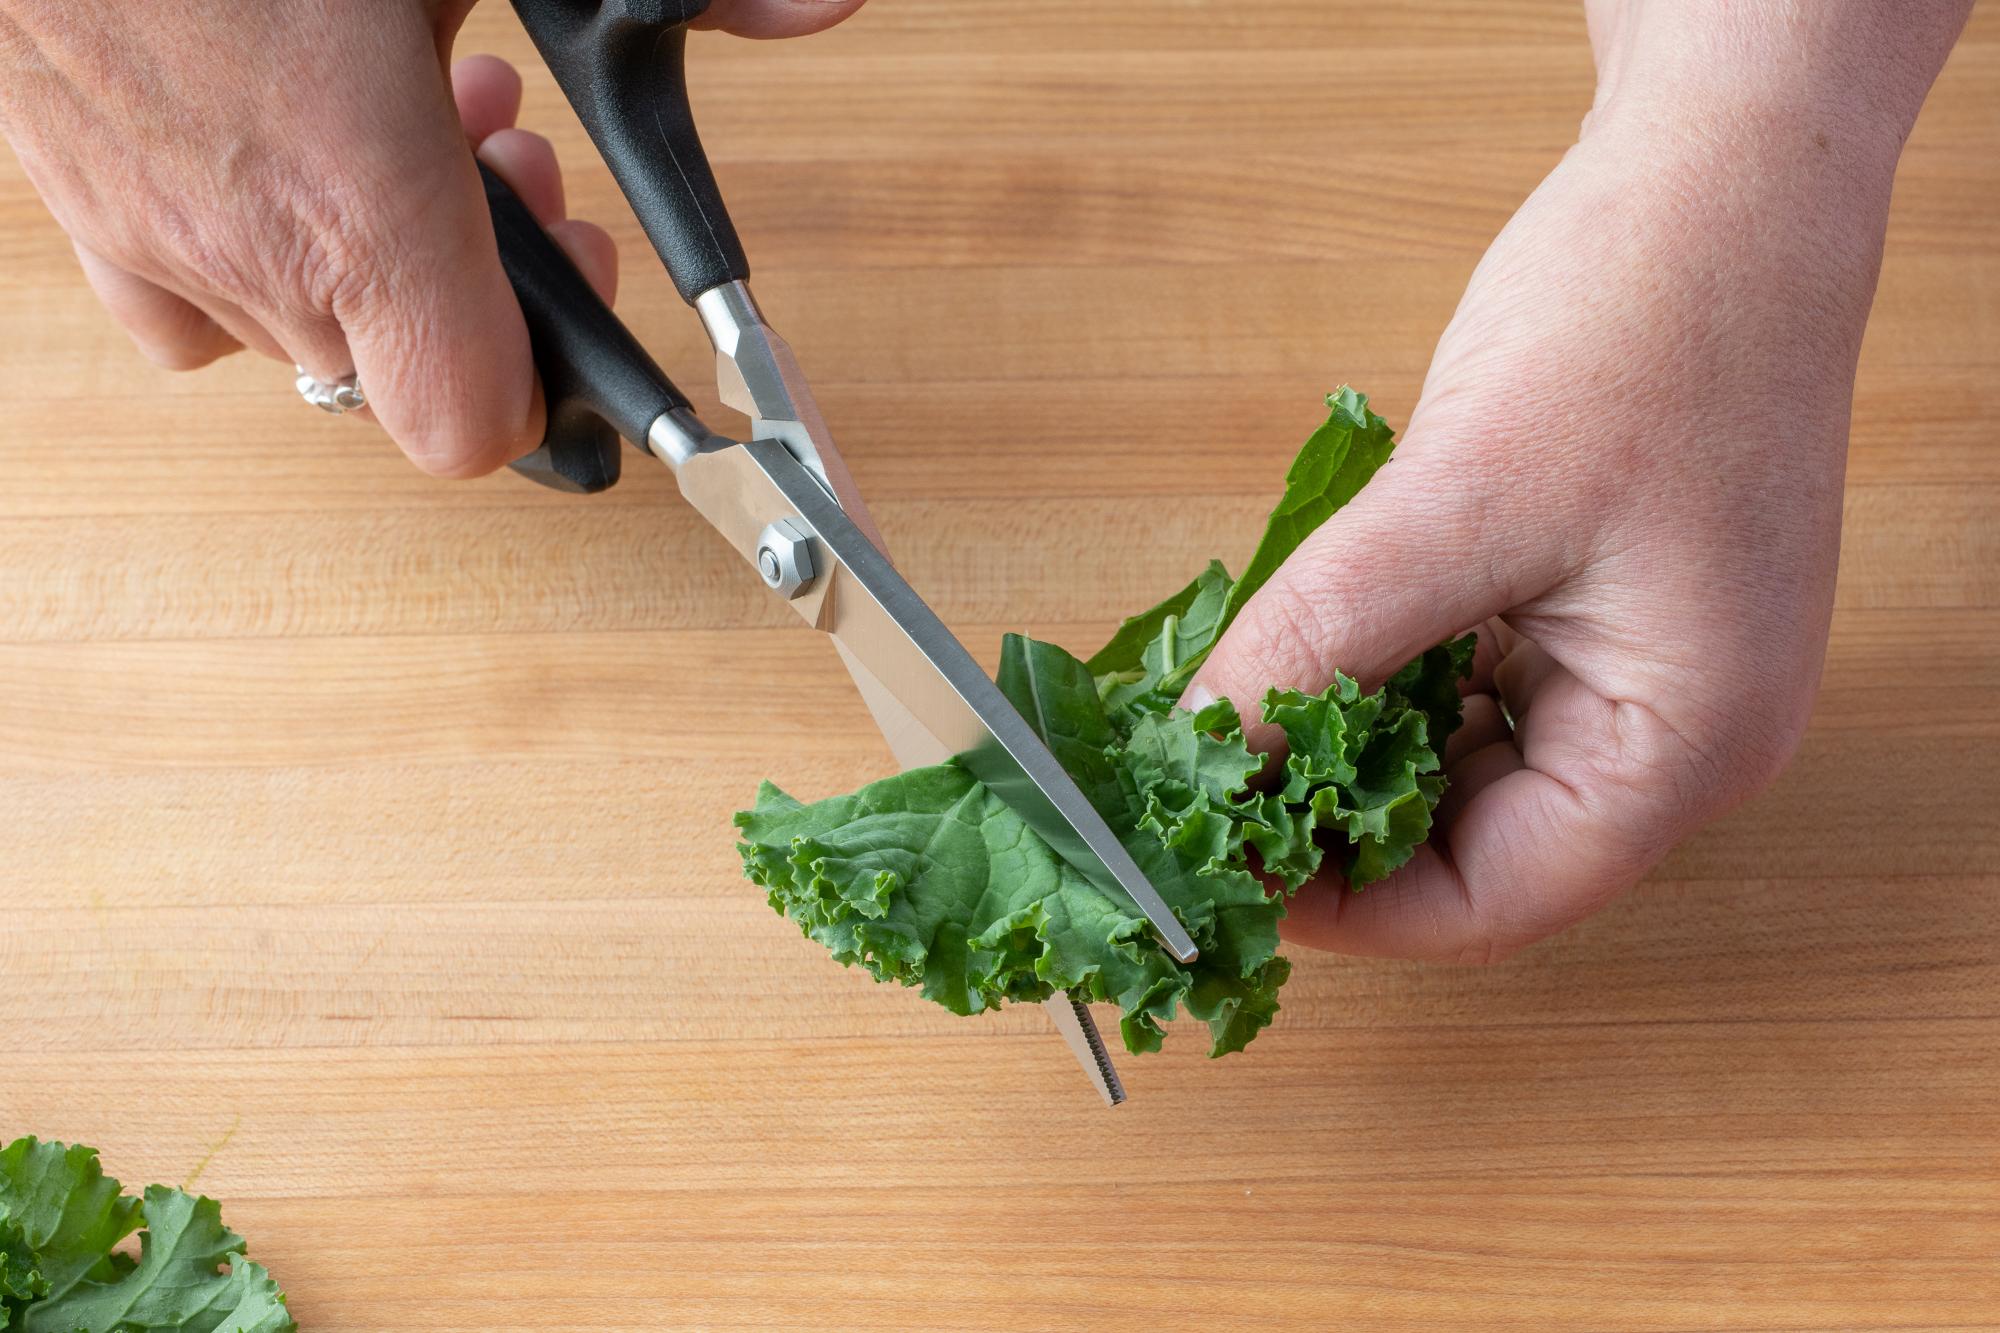 Using the Super Shears to snip the kale.